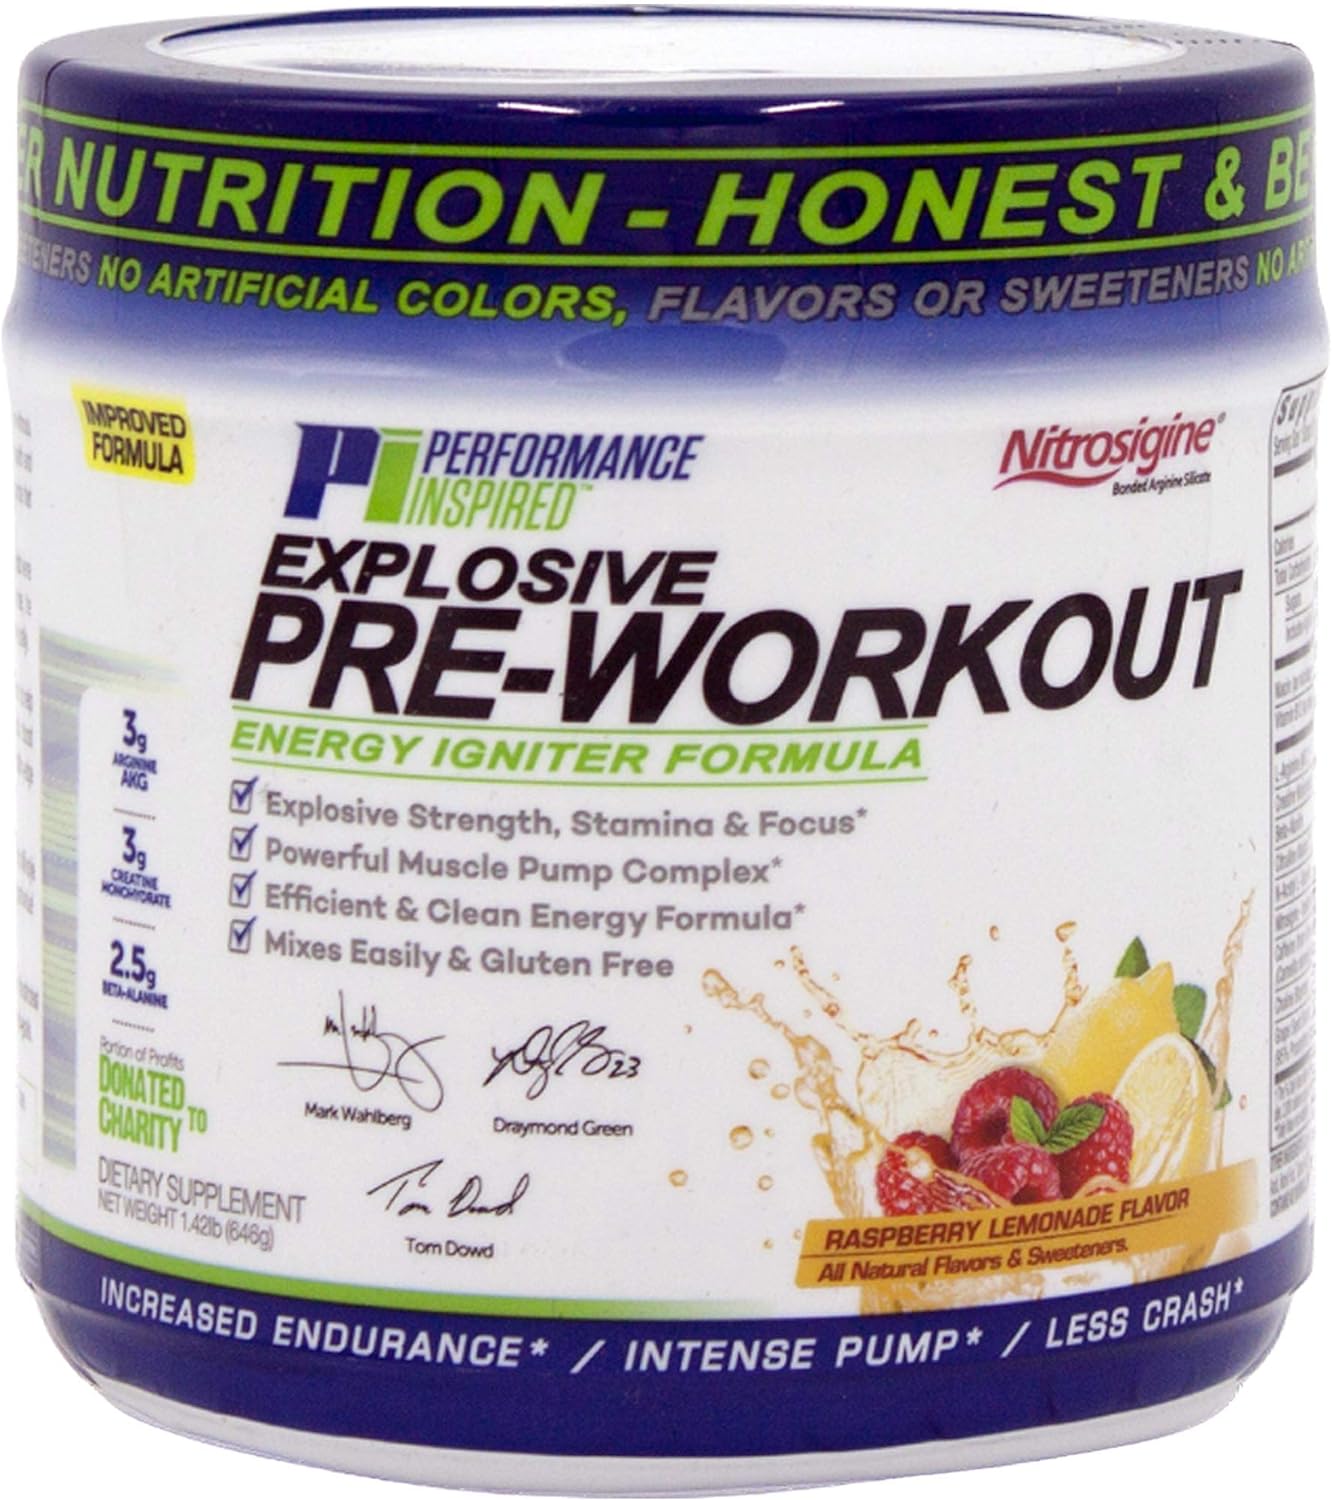 PERFORMANCE INSPIRED Nutrition PreWorkout Powder - Contains Citrulline